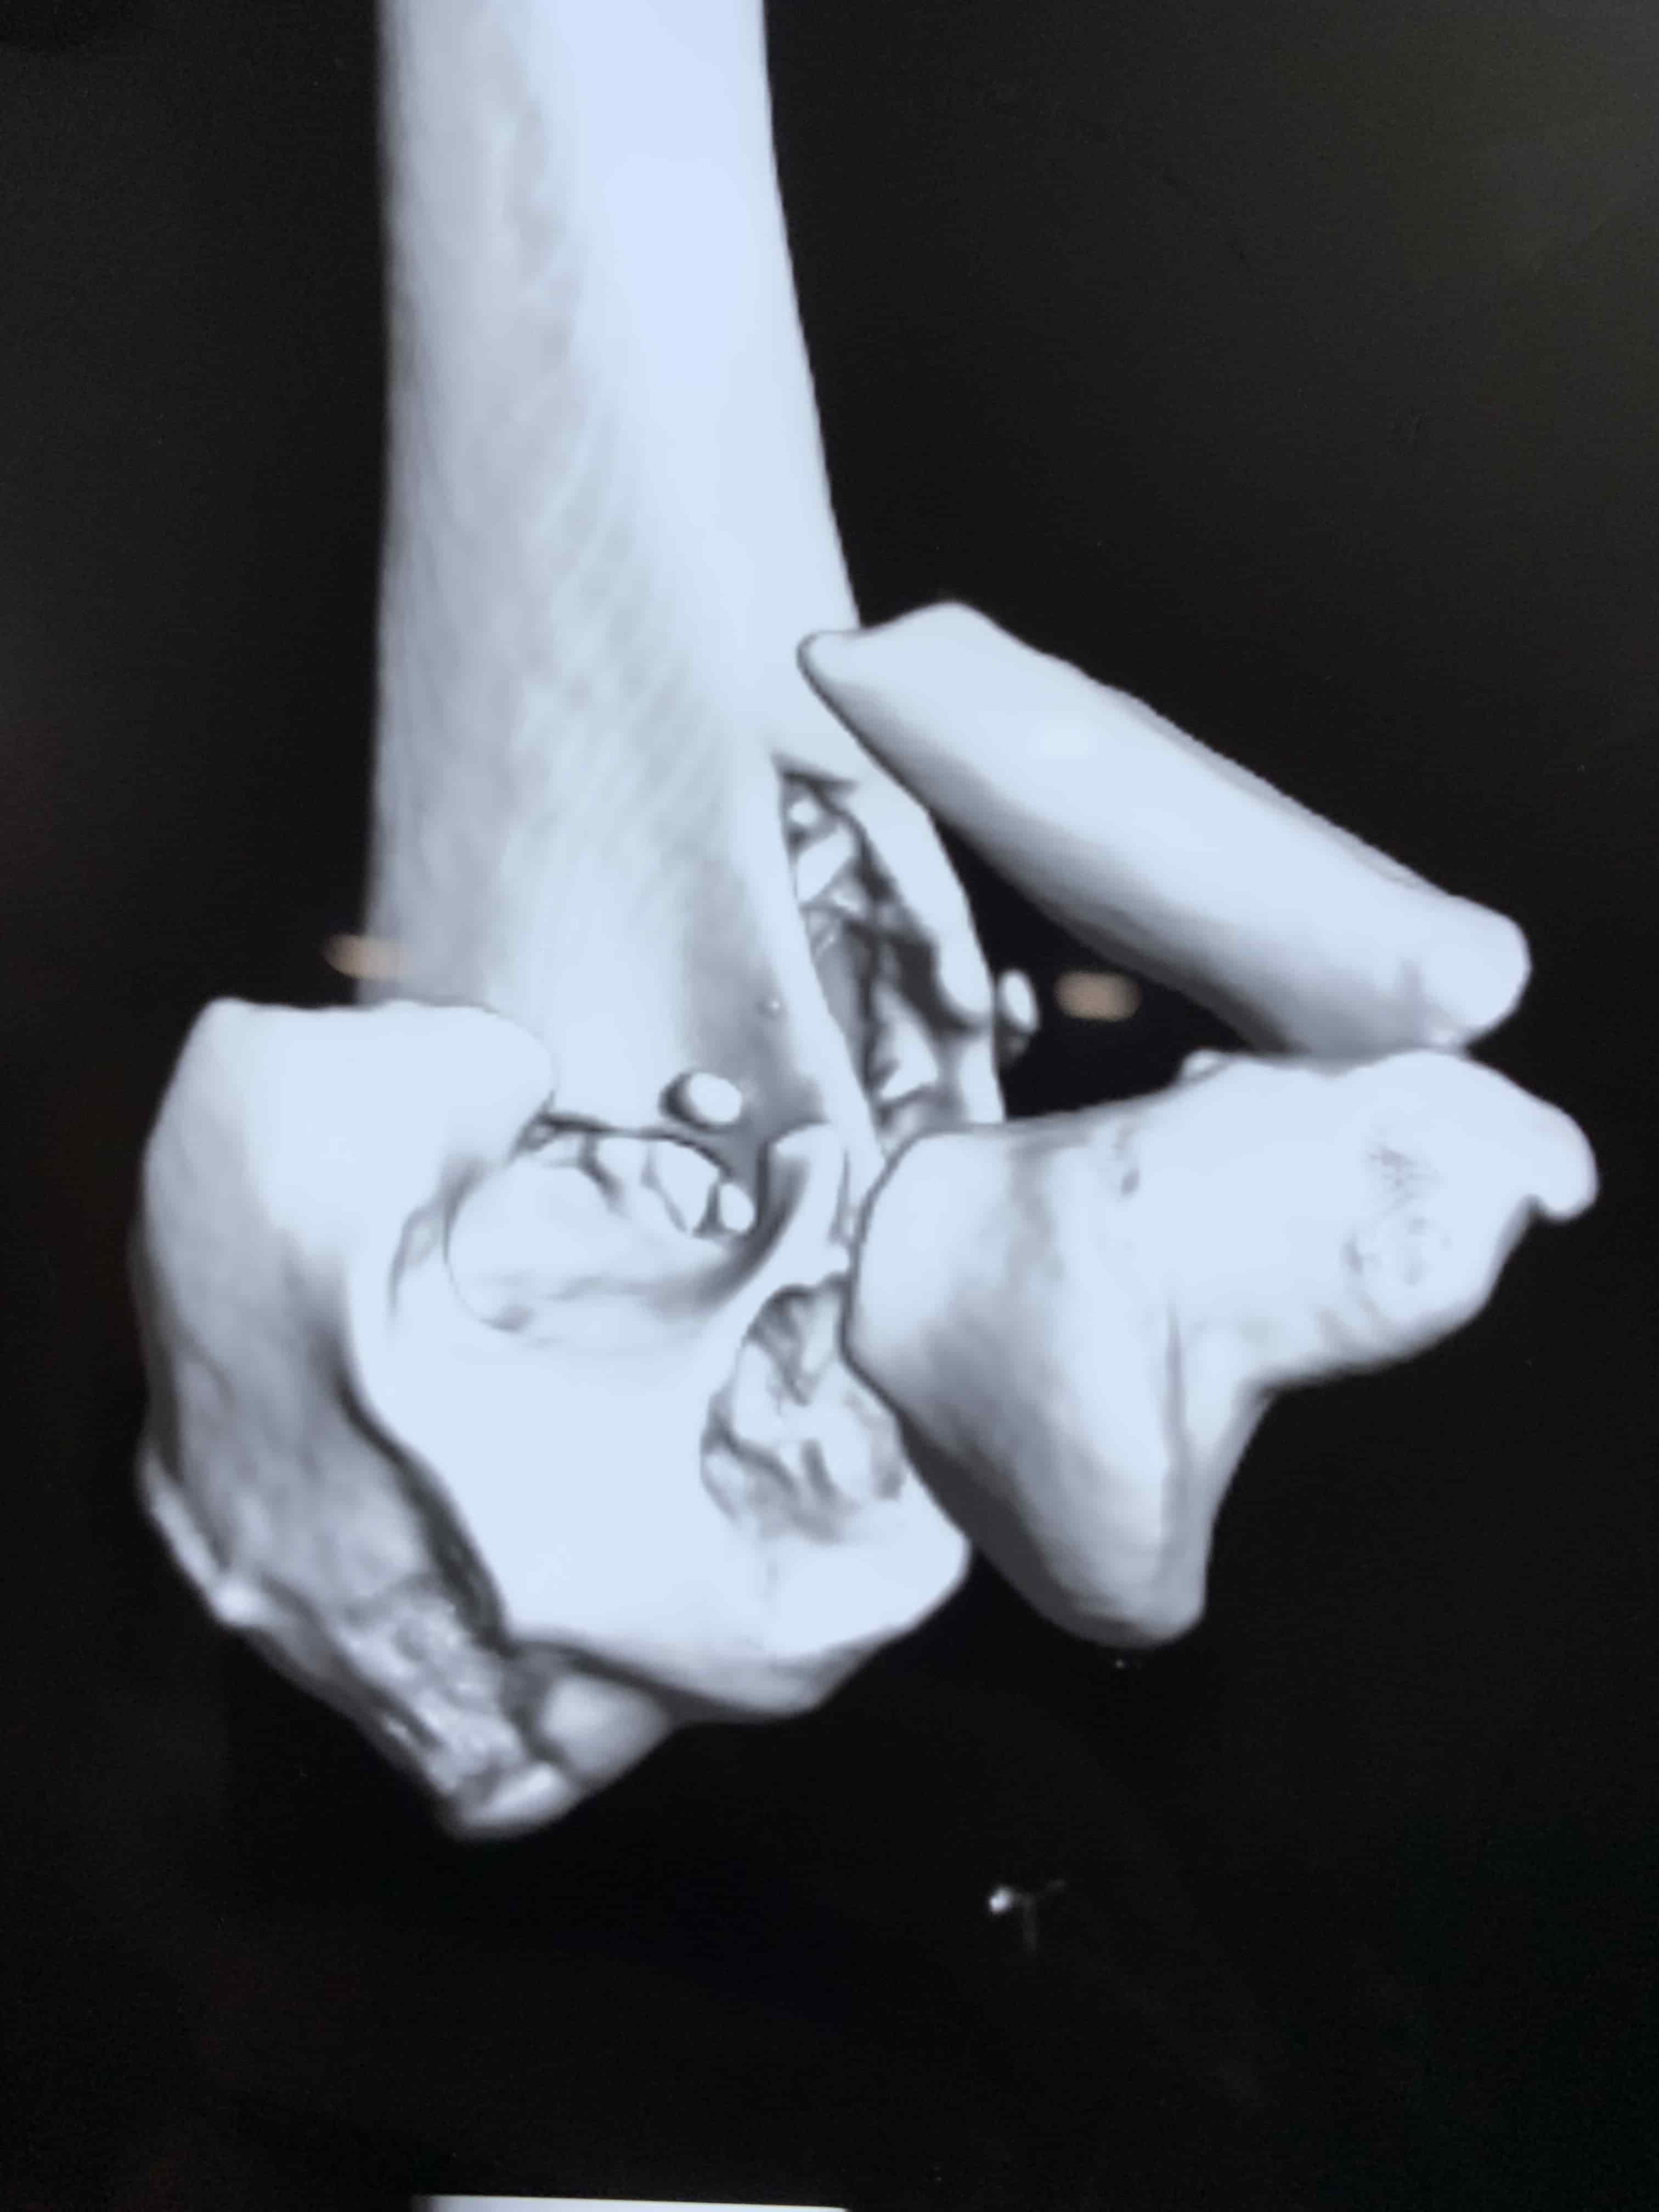 Complex Distal Humerus Comminuted Fracture